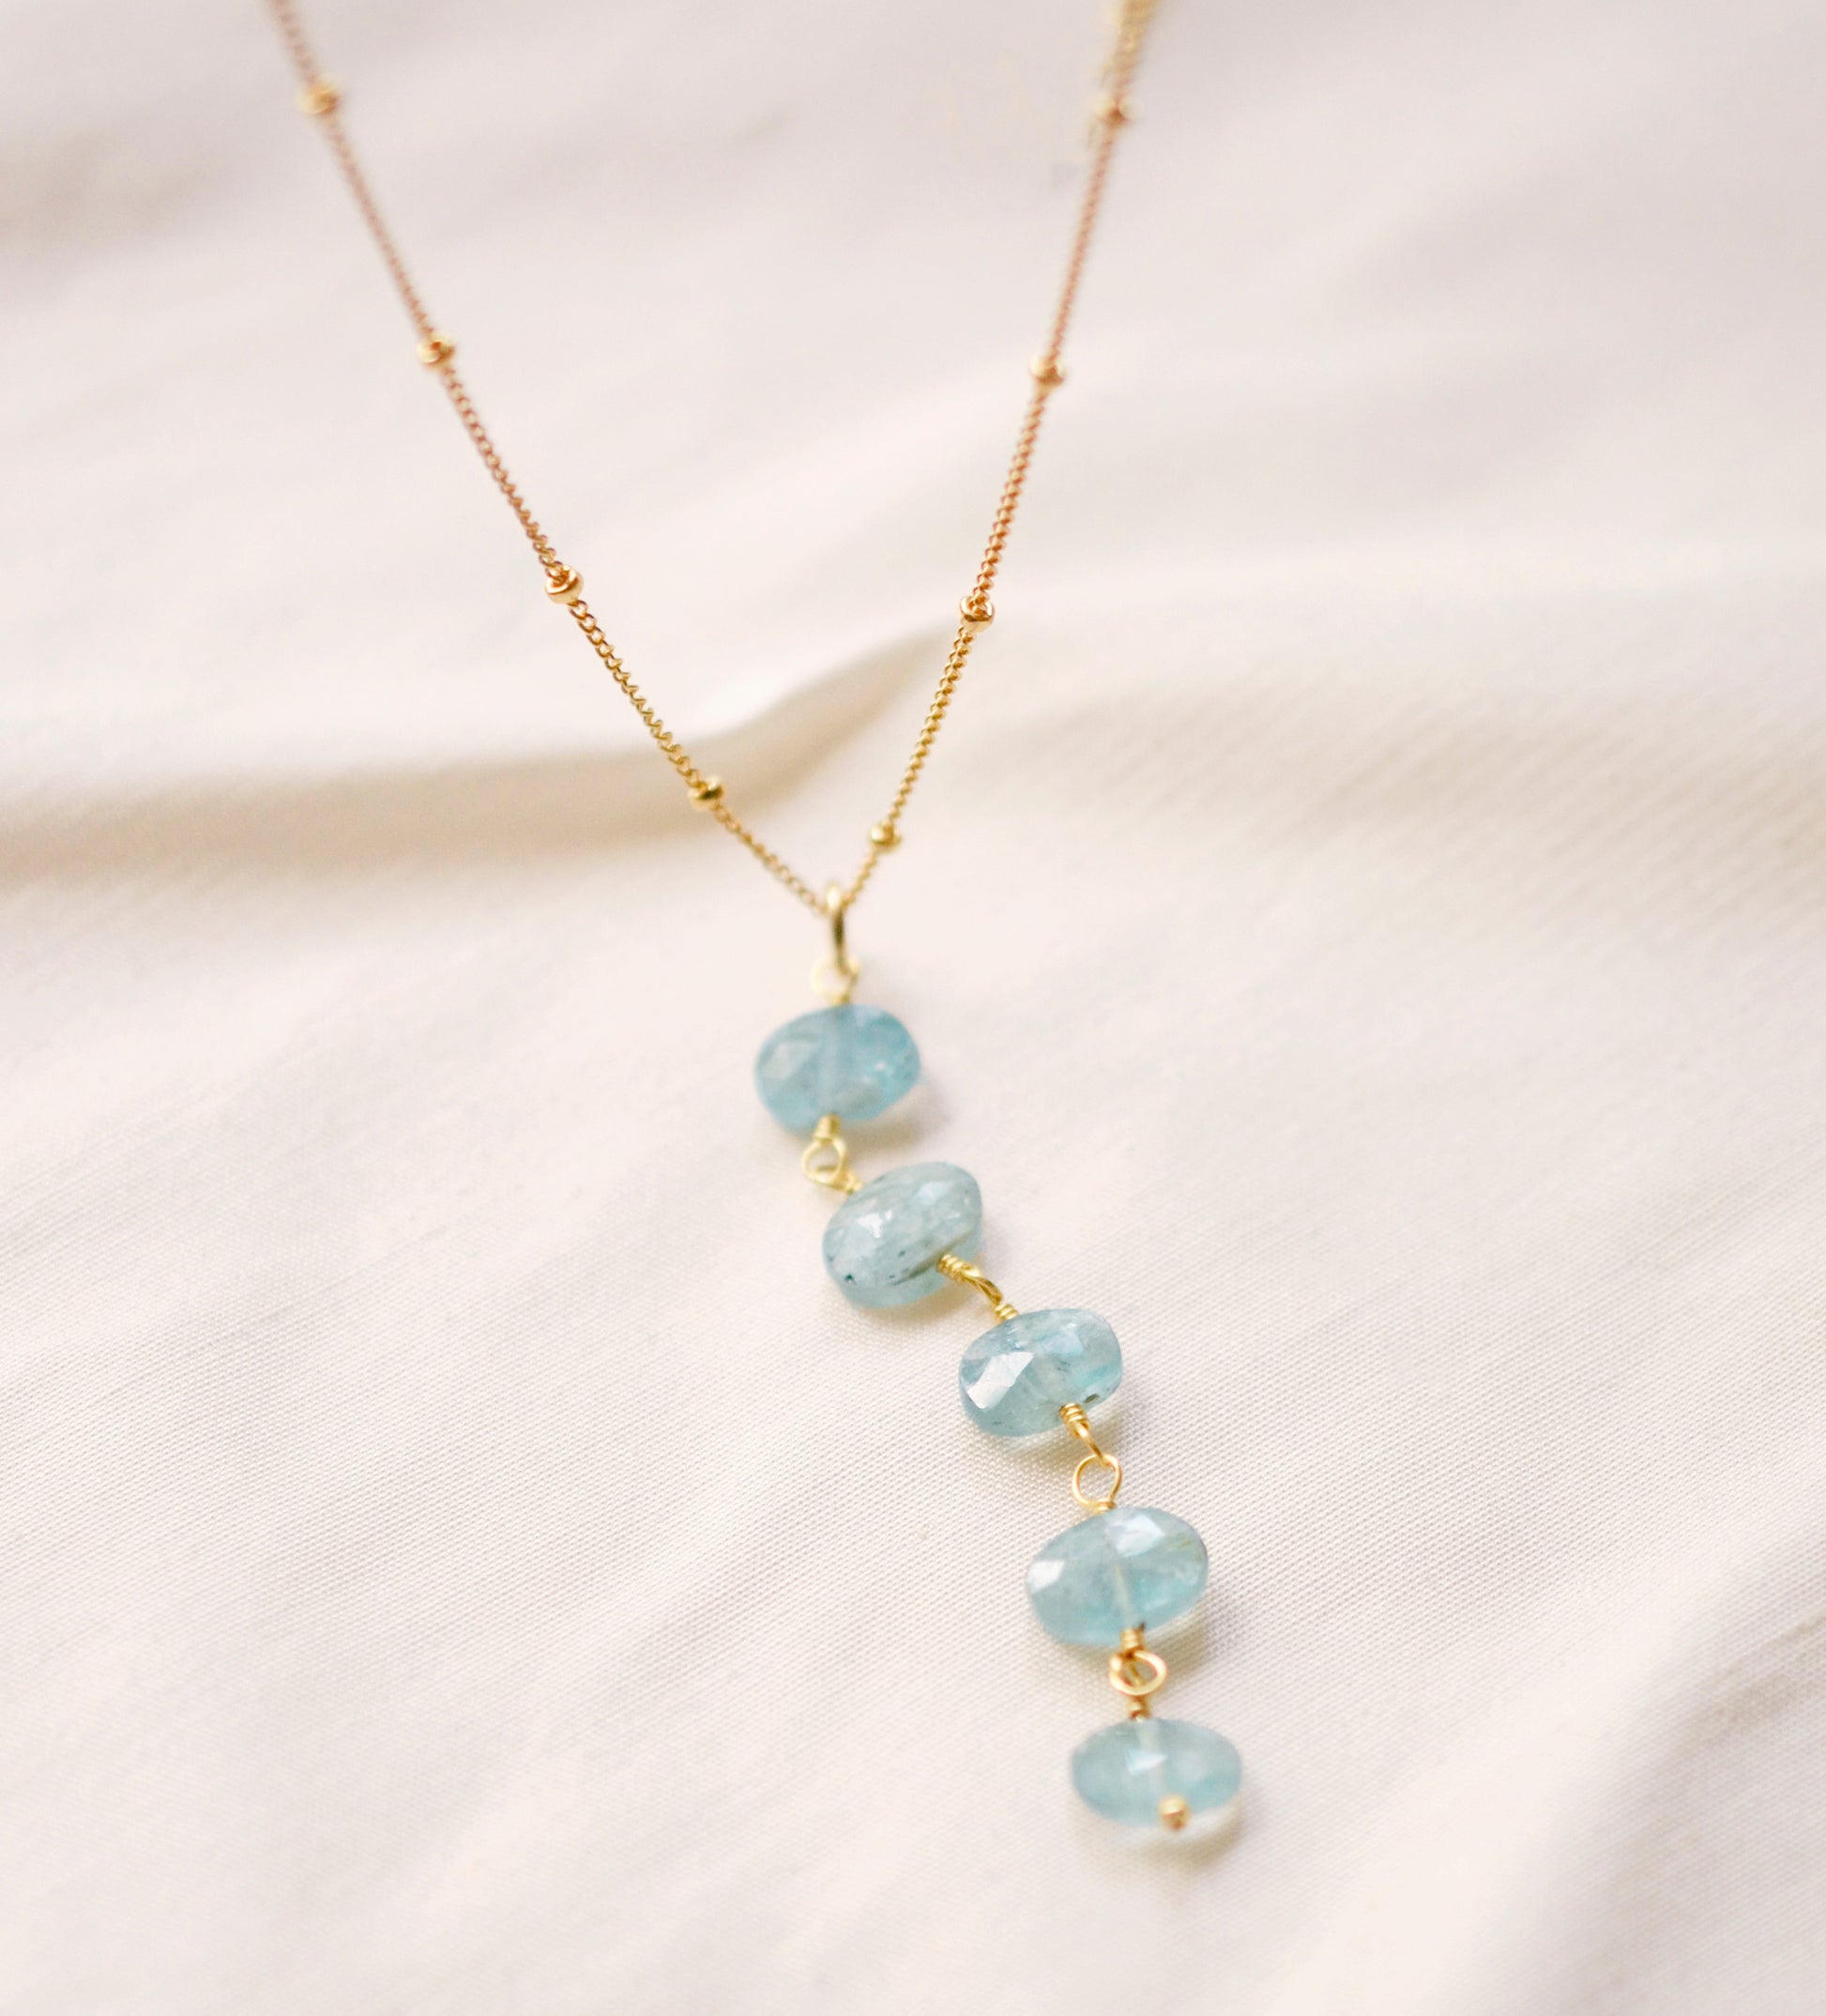 Genuine aqua blue Apatite gemstones set onto a beaded gold chain. The stones are flat faceted ovals and vary in aqua hues.